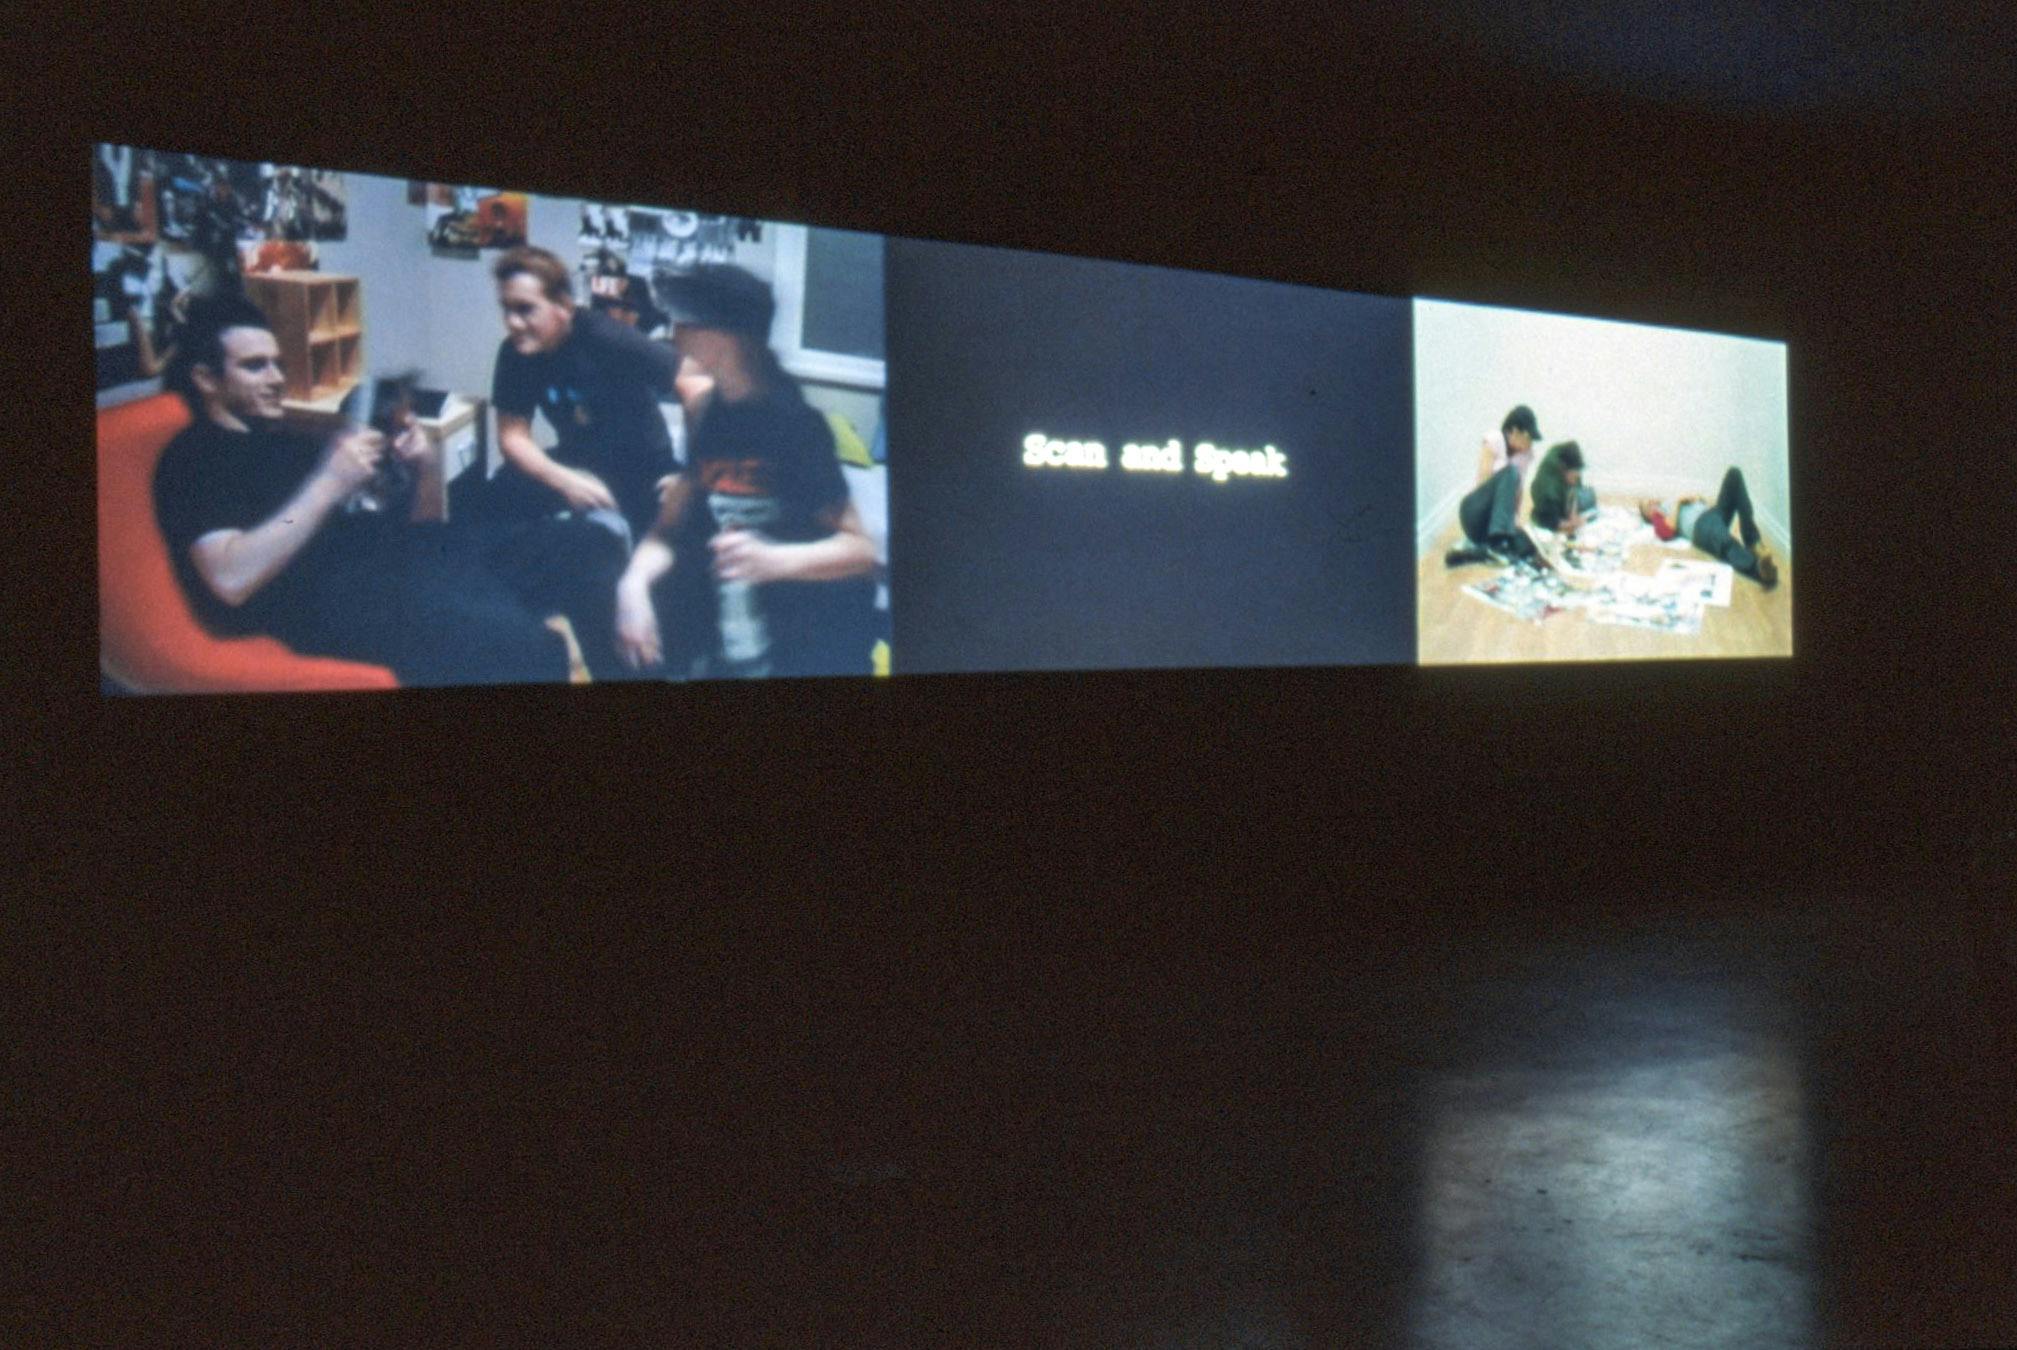 Installation image of a three-channel video by Alex Morrison. Some phrases appear in a black background in the middle video. Two other videos show people hanging out.